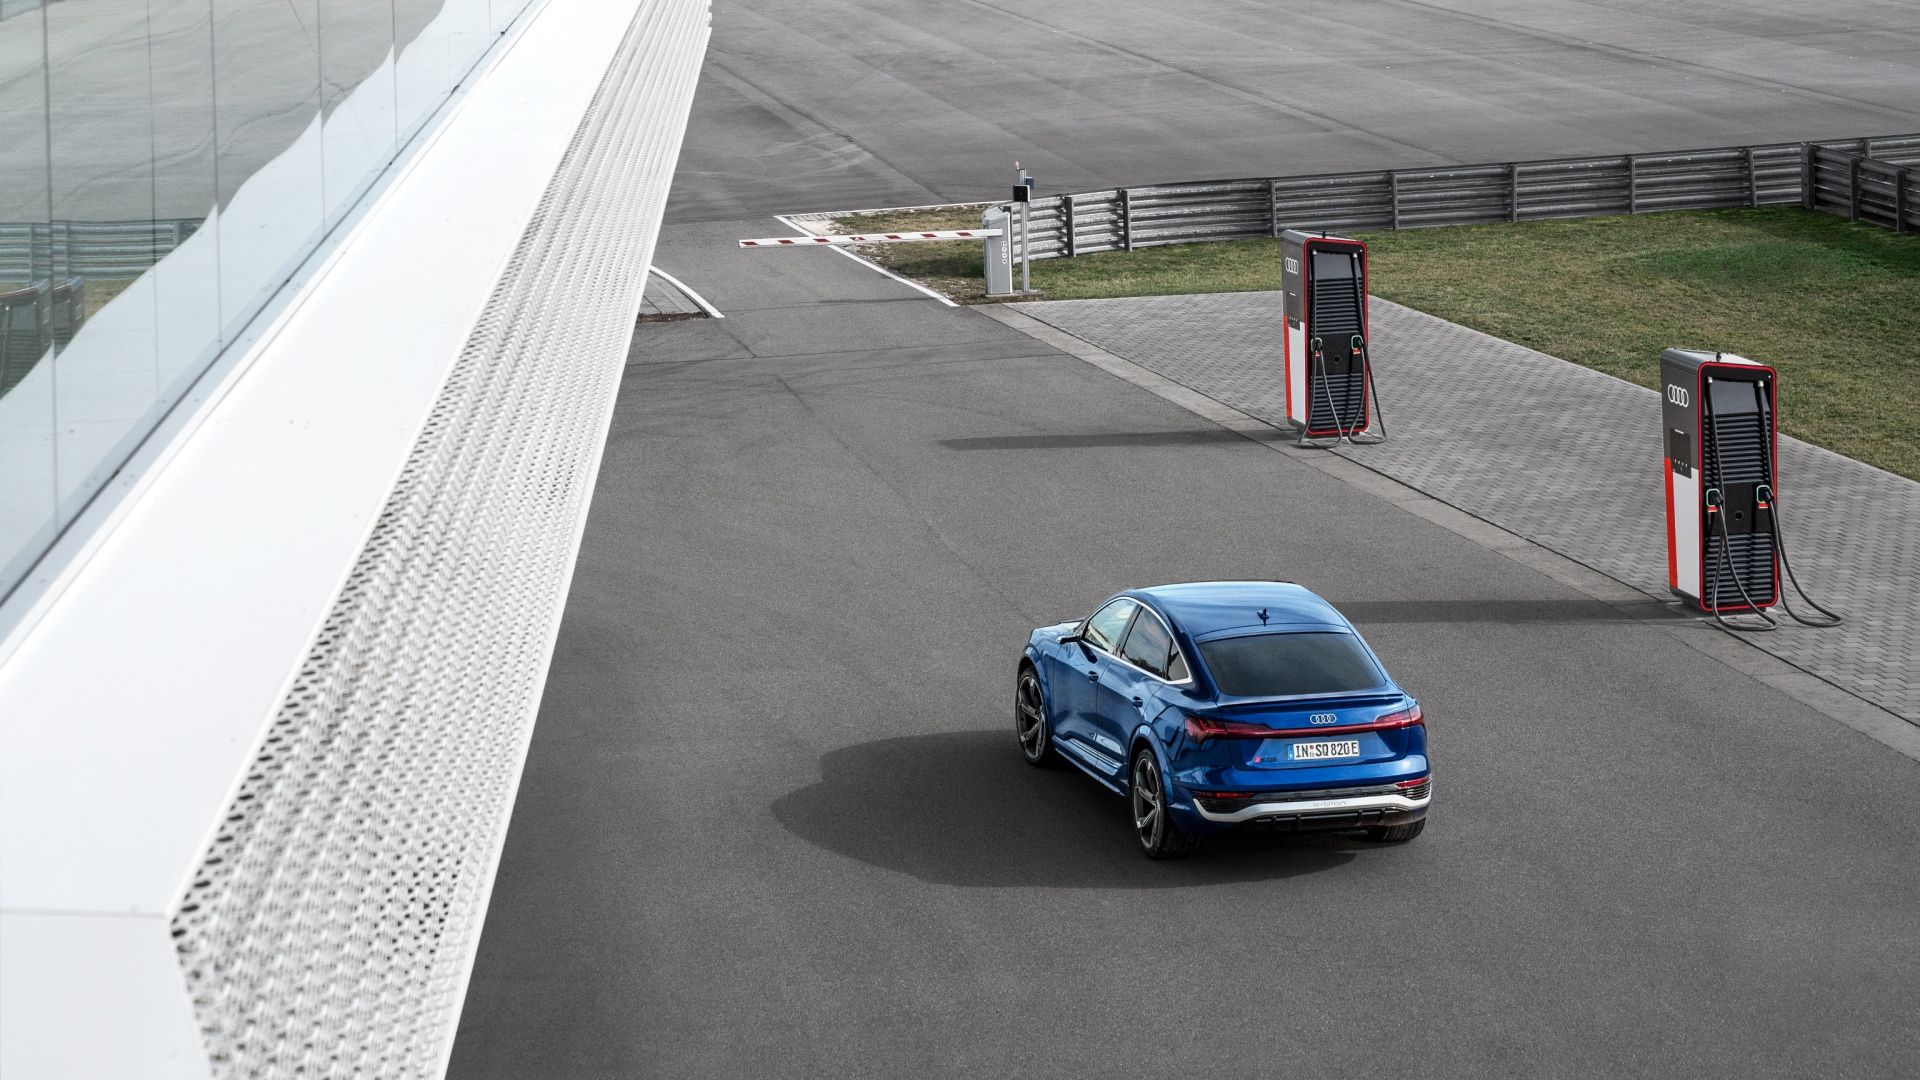 Audi SQ8 Sportback e-tron in front of several charging stations.